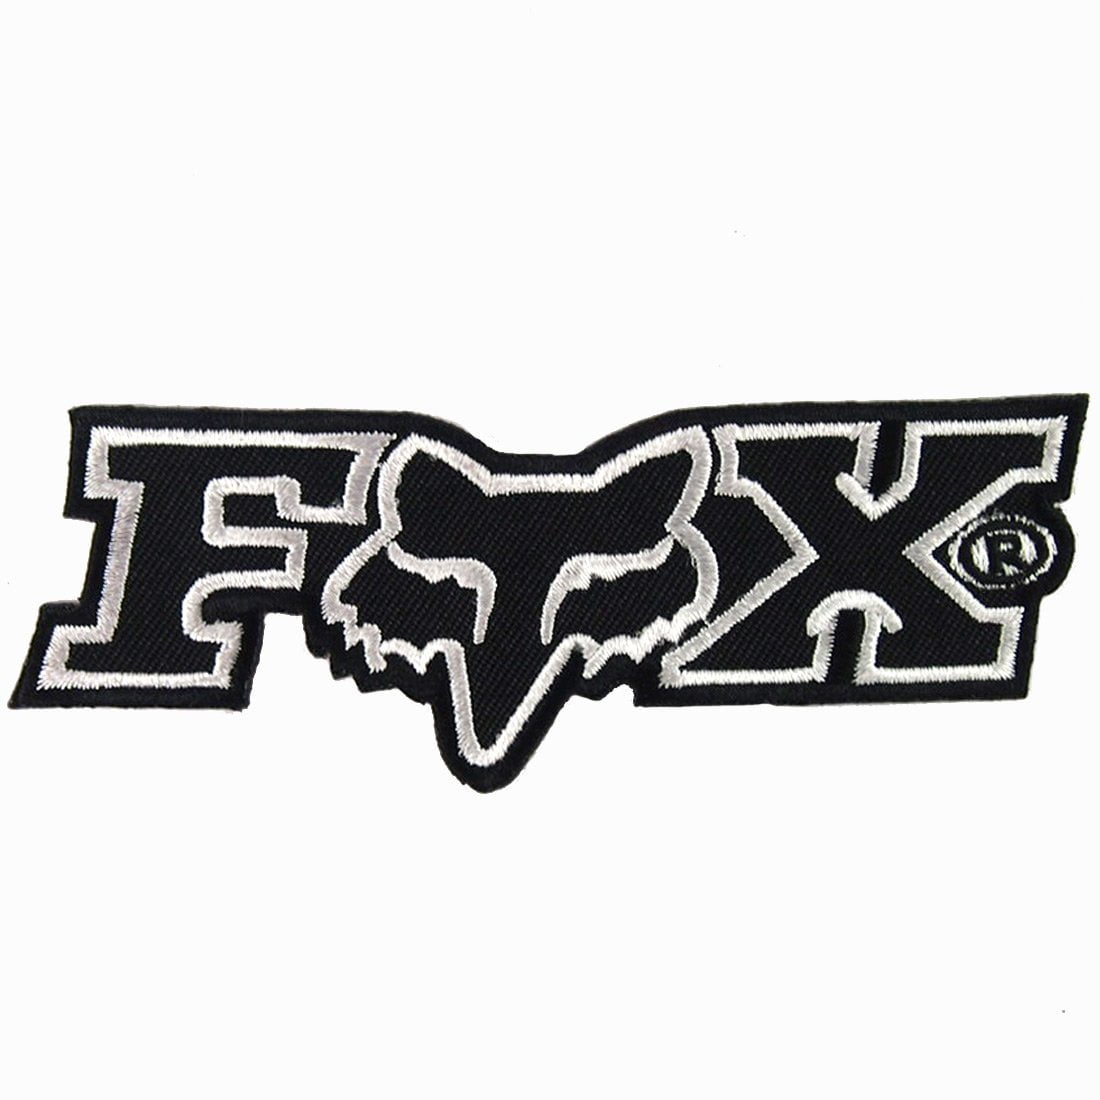 Fox Kojima Embroidered Iron On /Sew On Patch Badge For Clothes etc 